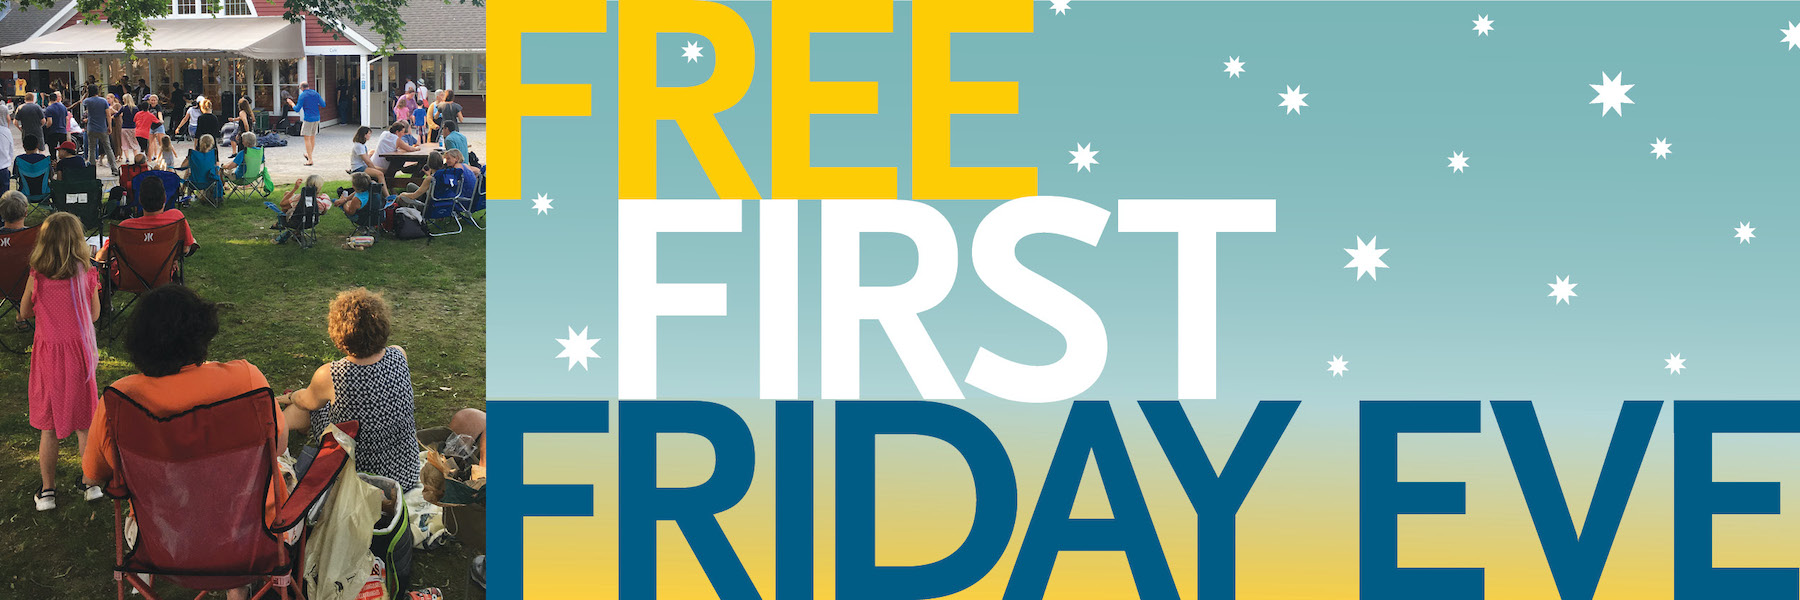 CANCELED – Free First Friday Eve